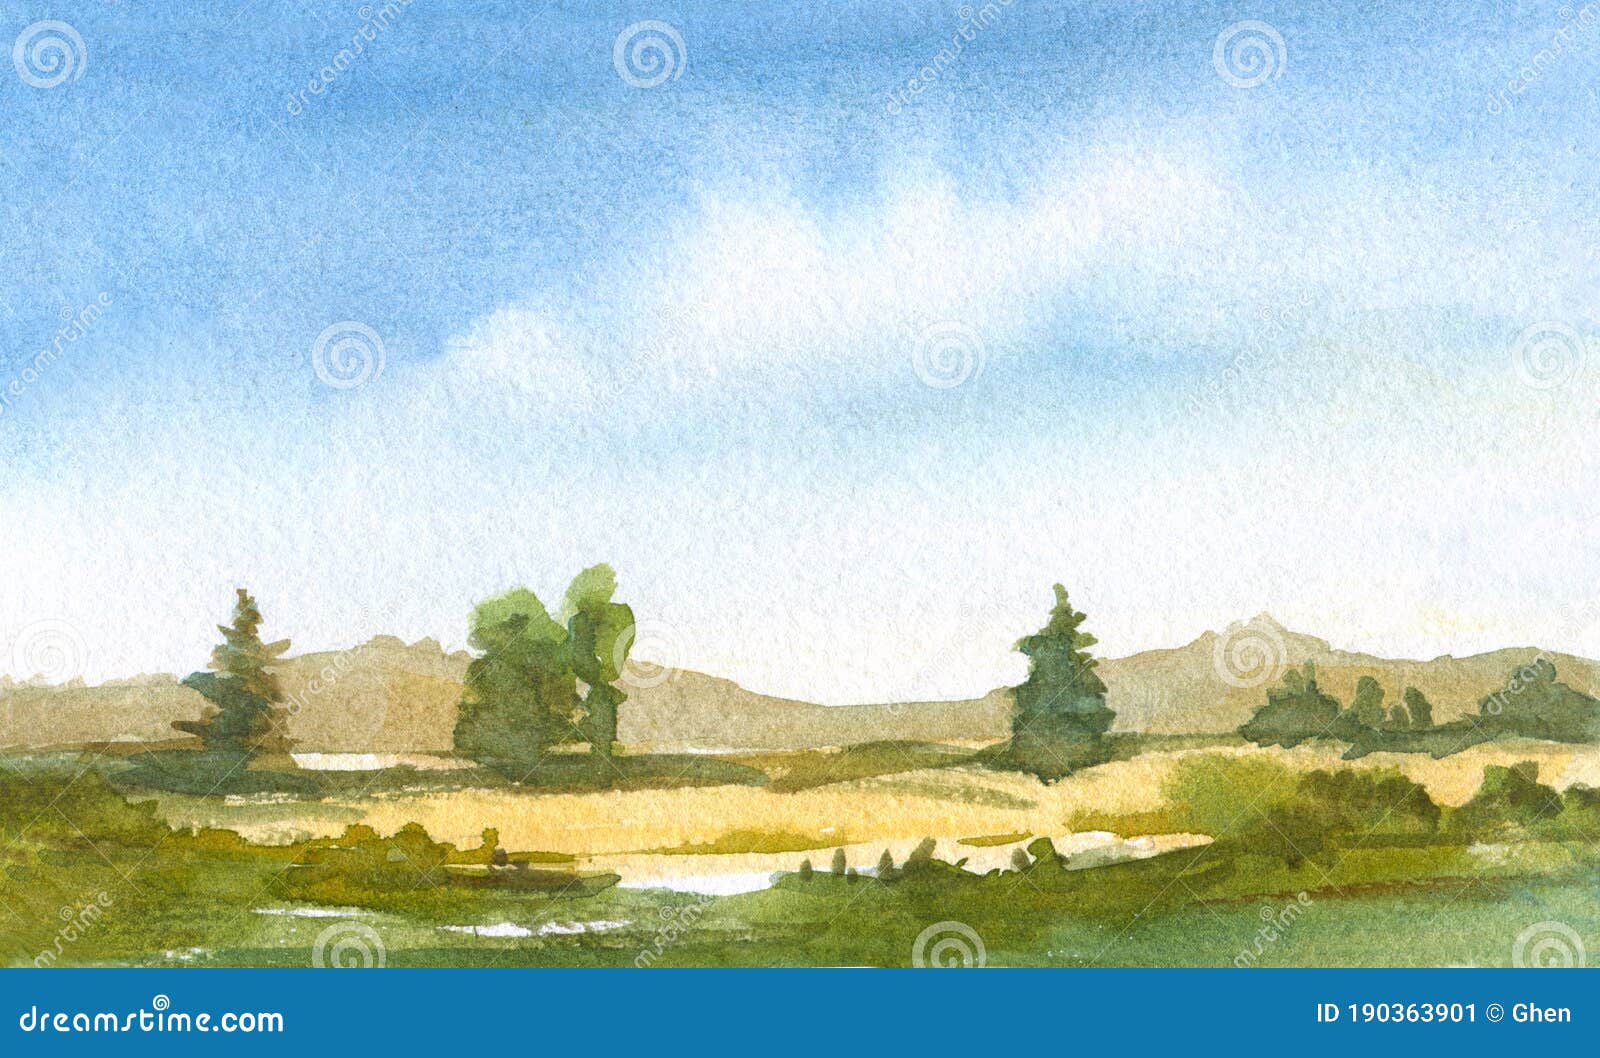 watercolor painting tranquil landscape with hills, firs, blue sky  with clouds, green grass